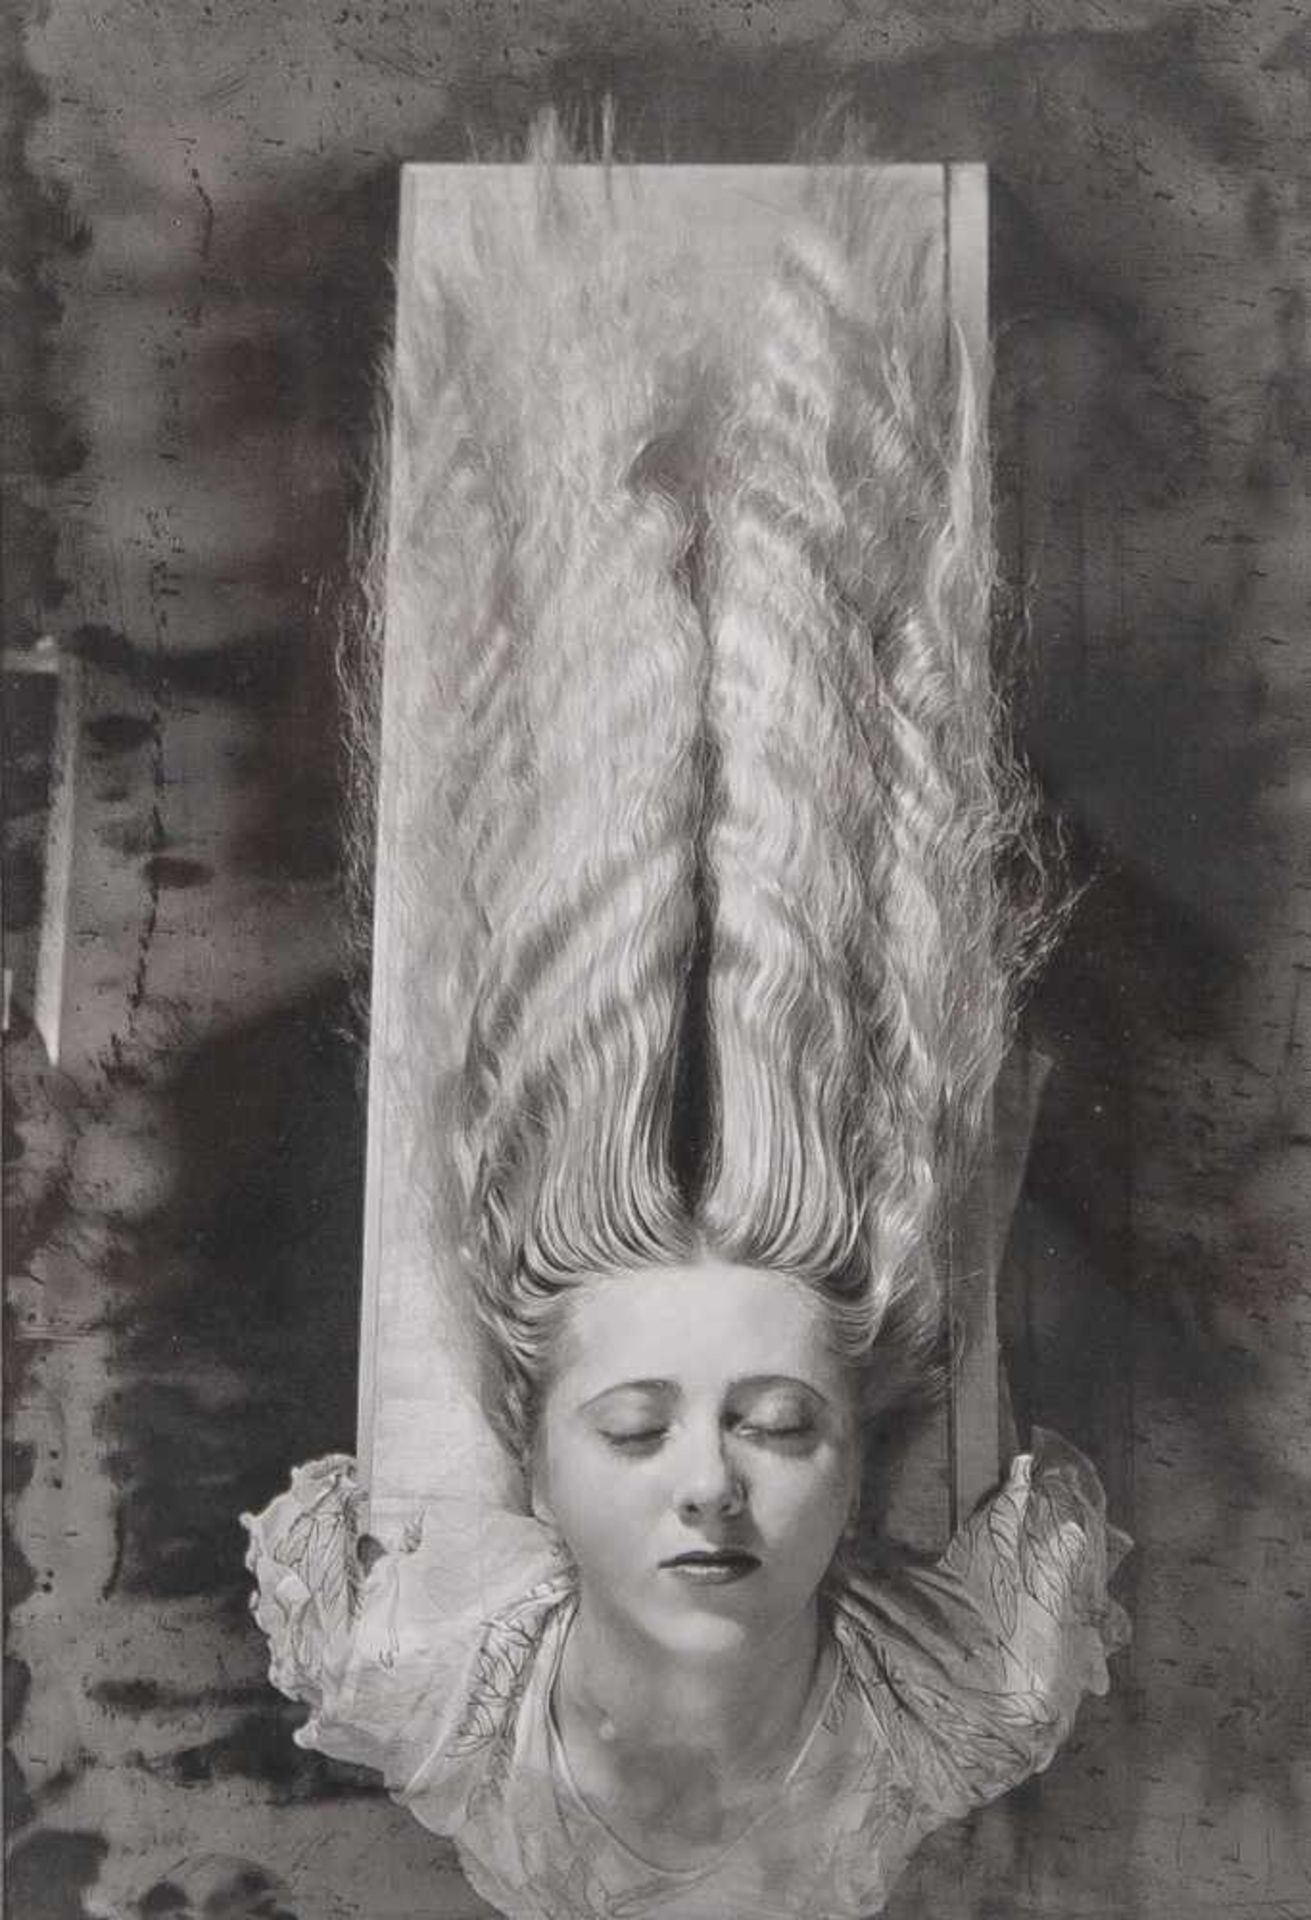 Man Ray (1890-1976), Women with long hair", 1929, Offsetdruck. Ca. 22,5 x 33 cm, PP, hinter Glas